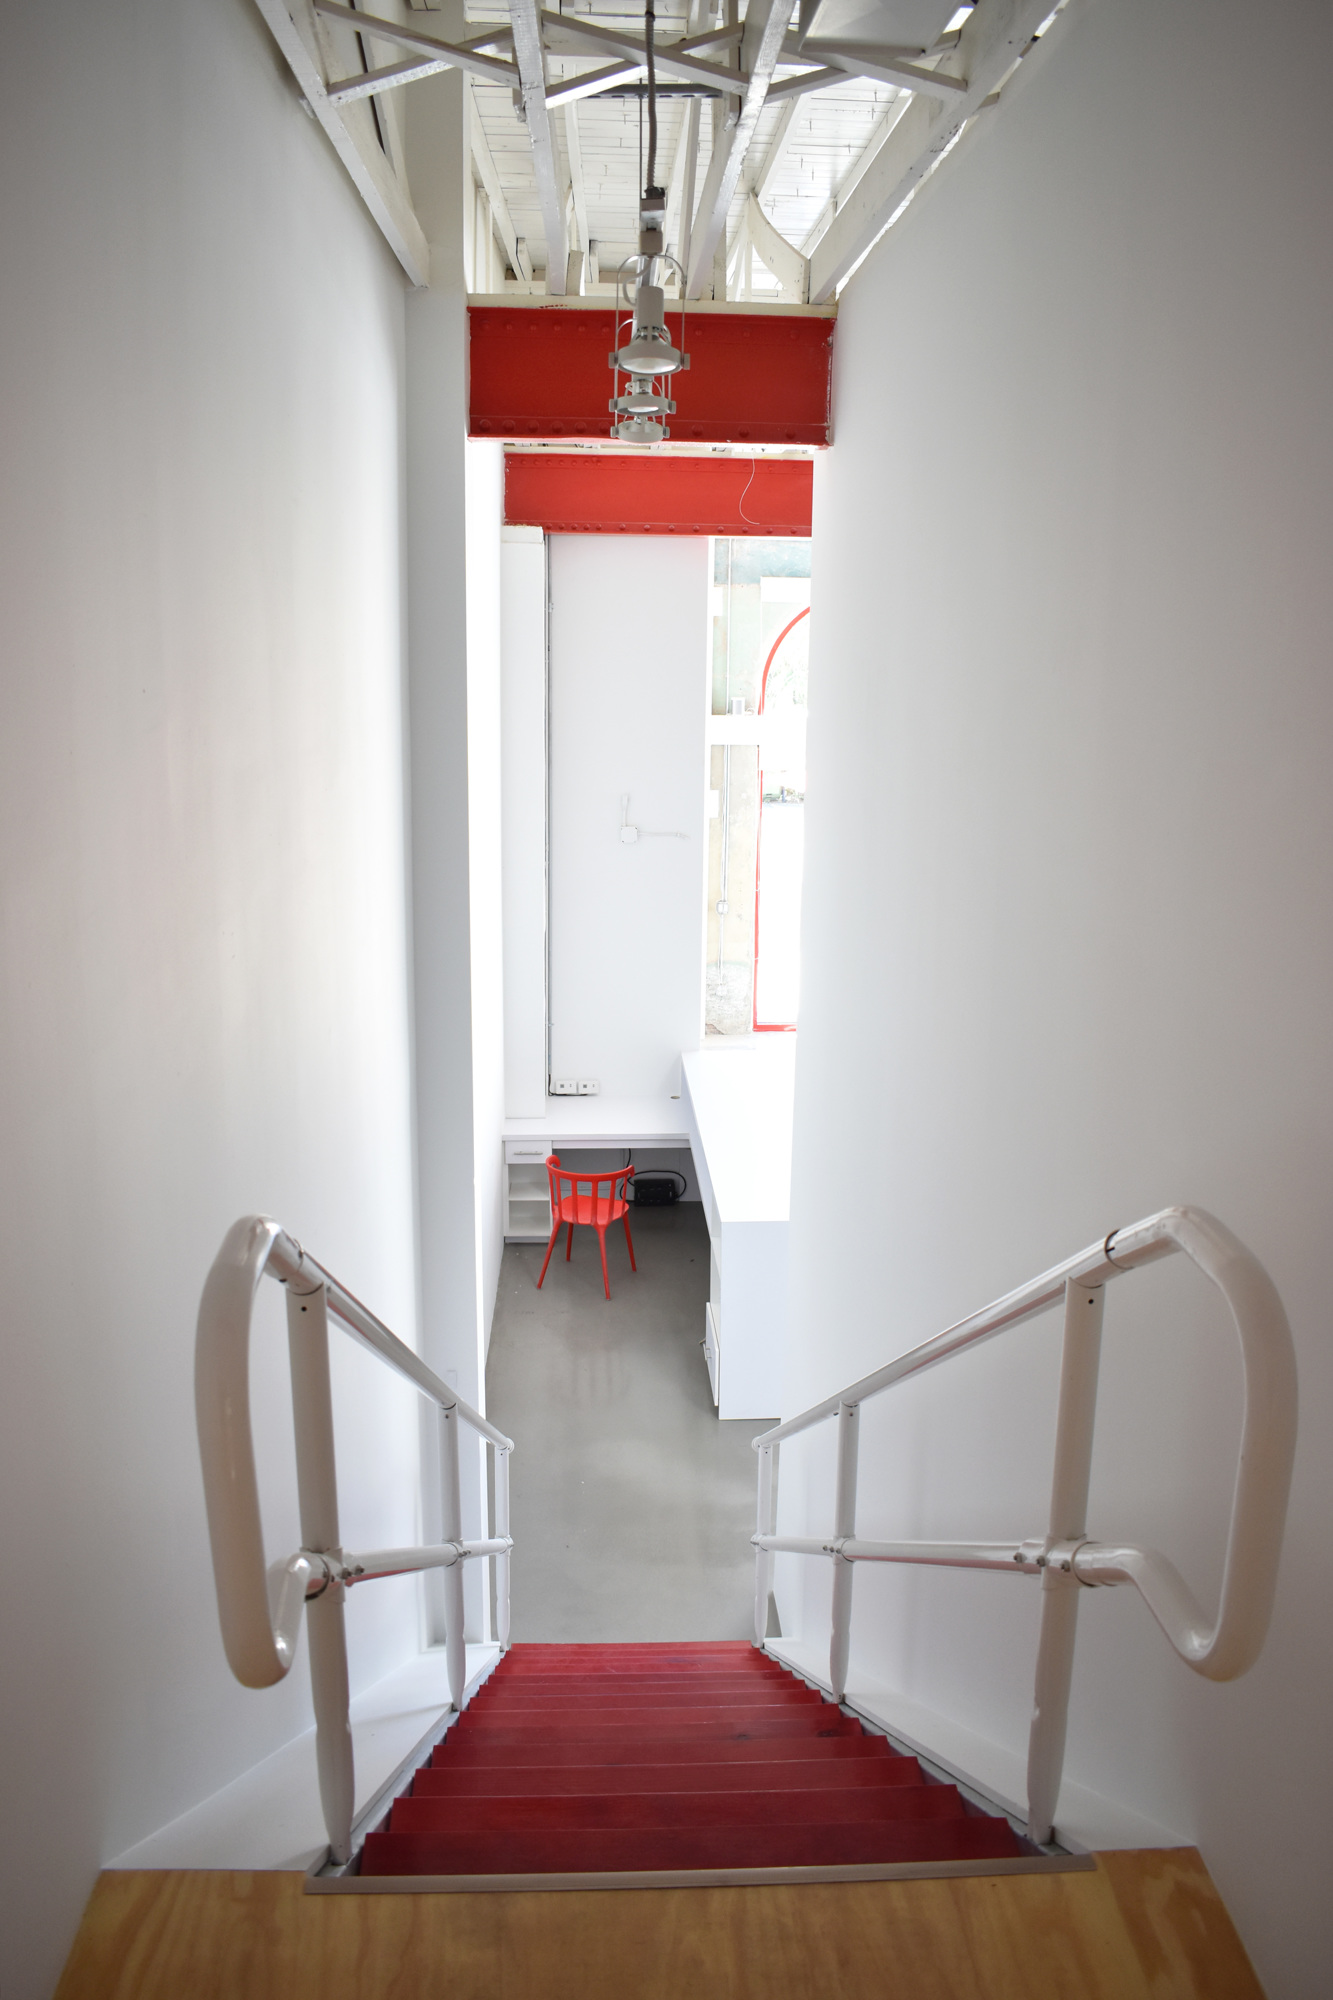 The staircase that was once in the back of the gallery was moved to the front for easy access to the collector’s room and office space. Photo by Niki Kottmann